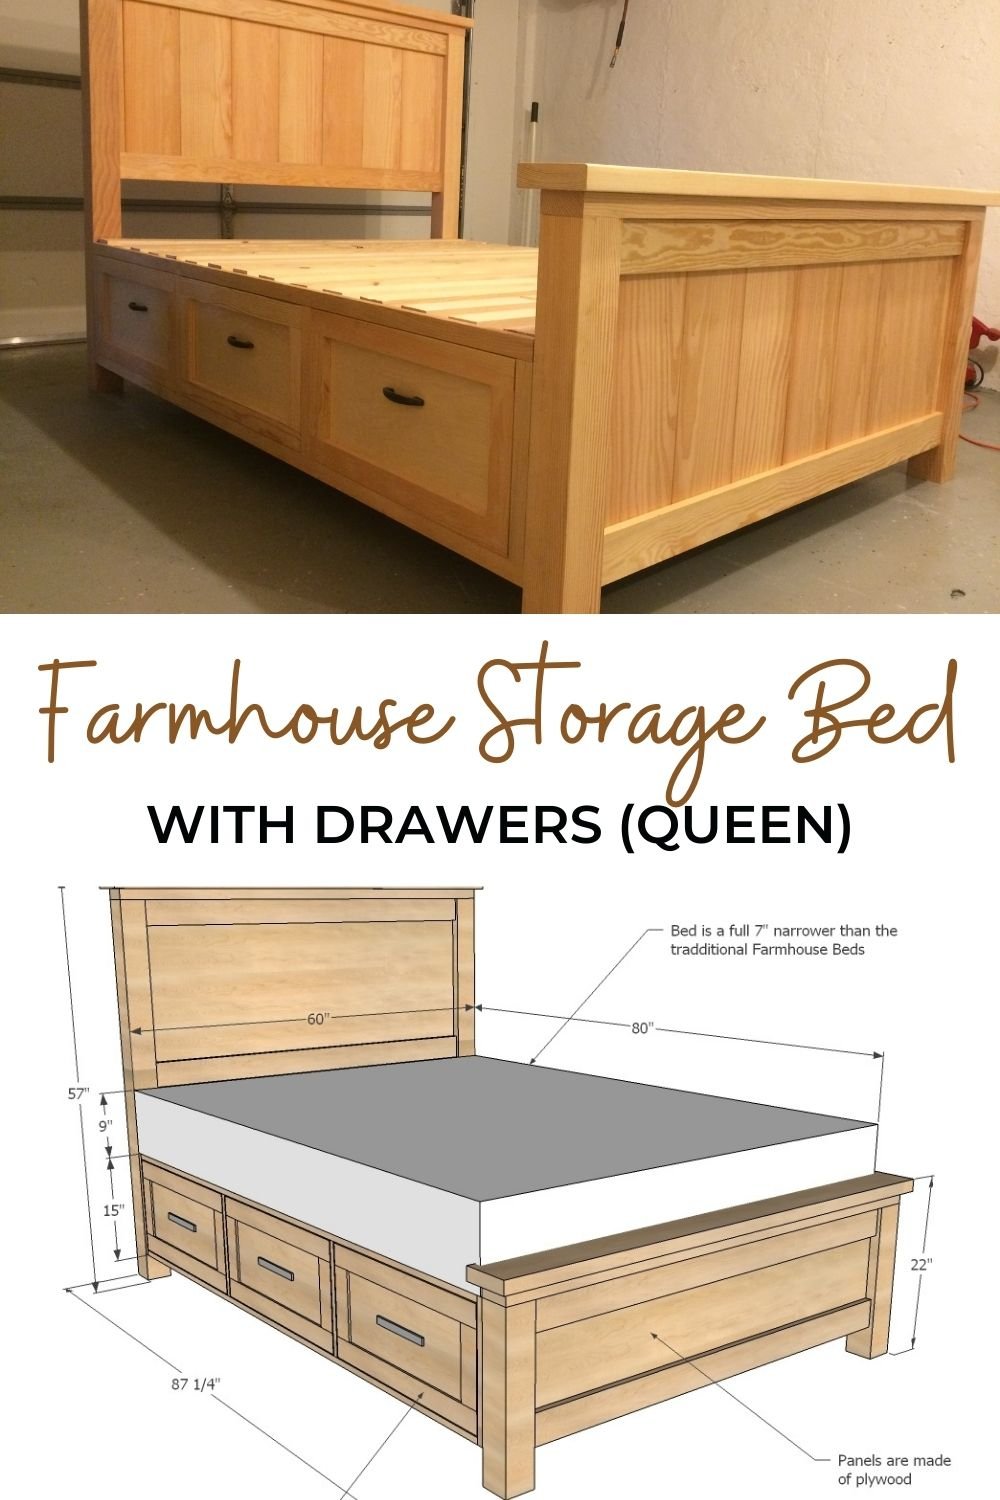 Farmhouse Storage Bed With Drawers, Diy Rustic Queen Bed Frame With Storage Boxes